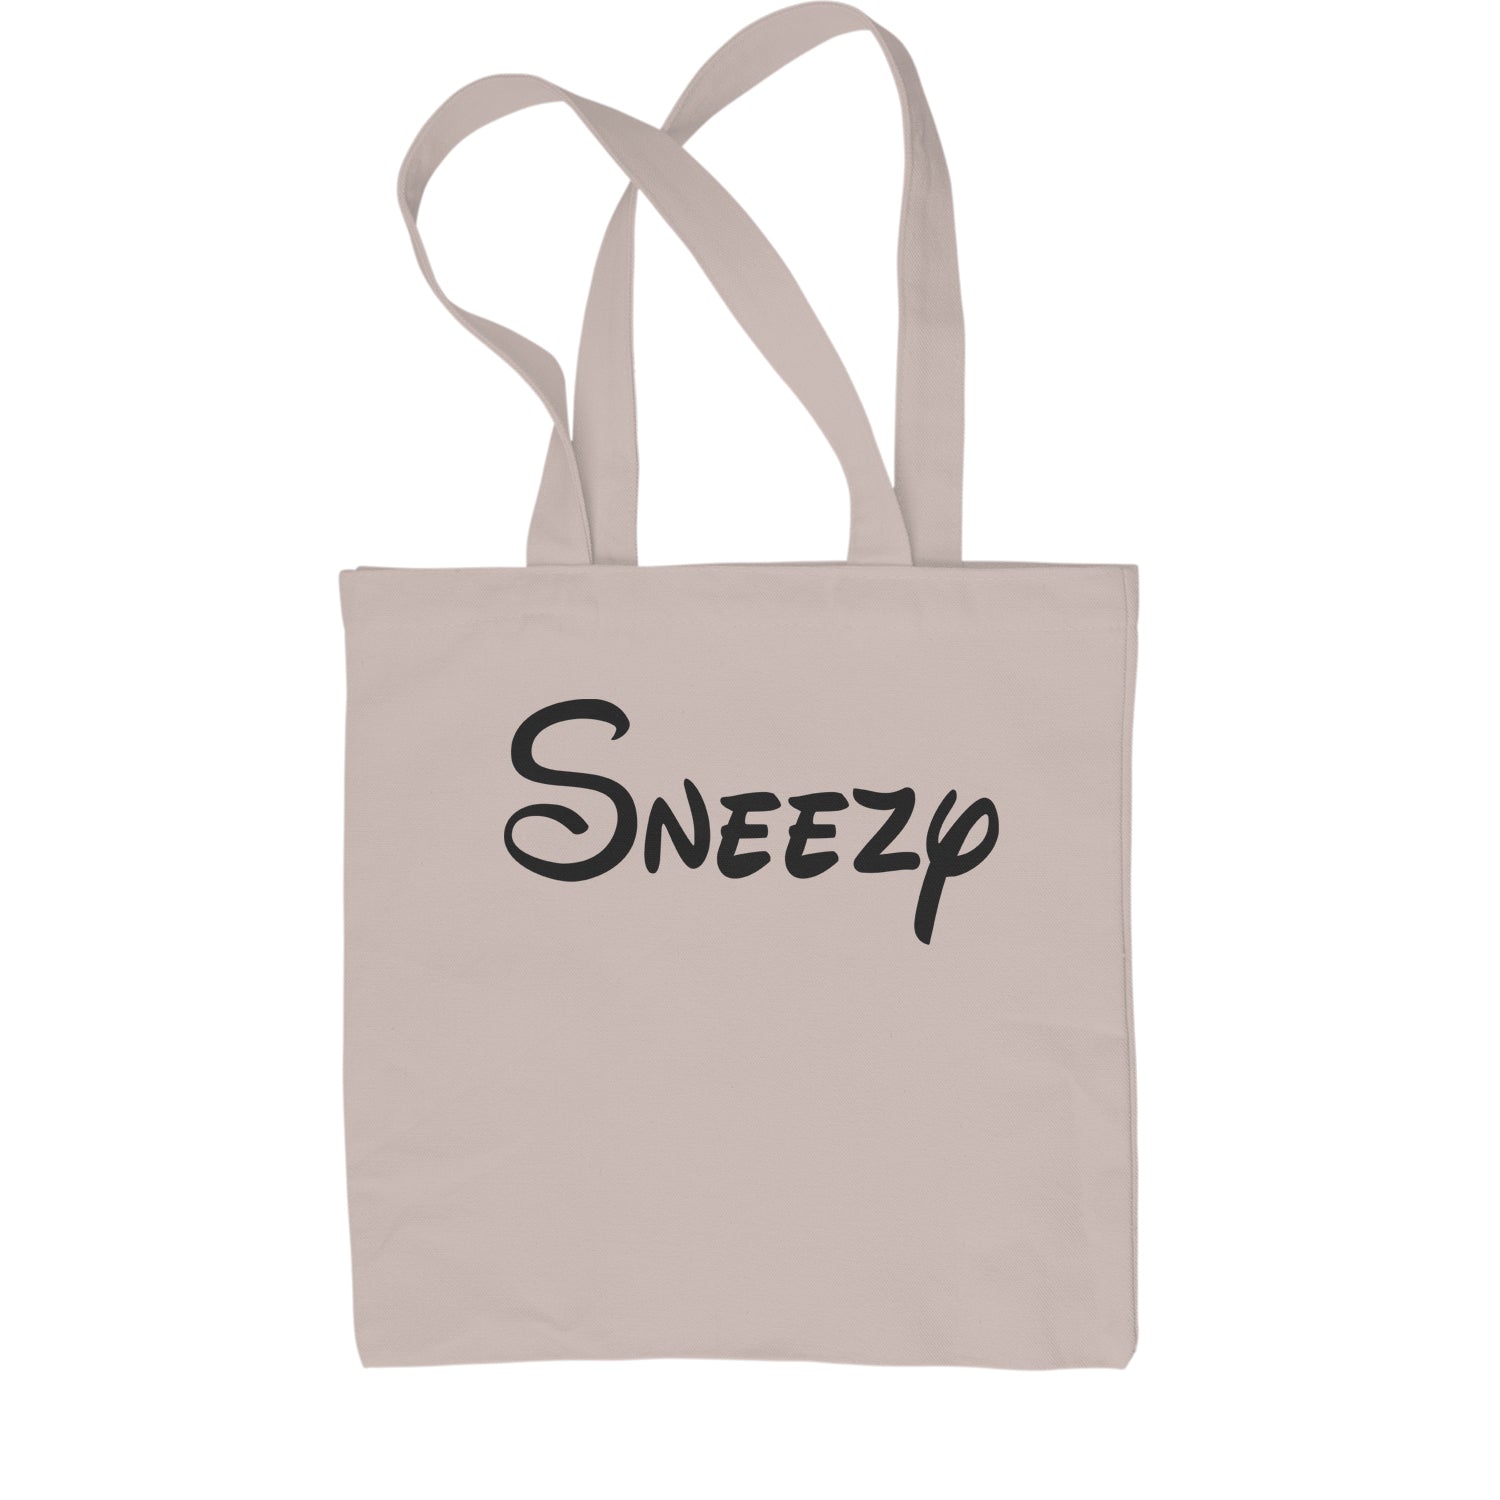 Sneezy - 7 Dwarfs Costume Shopping Tote Bag and, costume, dwarfs, group, halloween, matching, seven, snow, the, white by Expression Tees